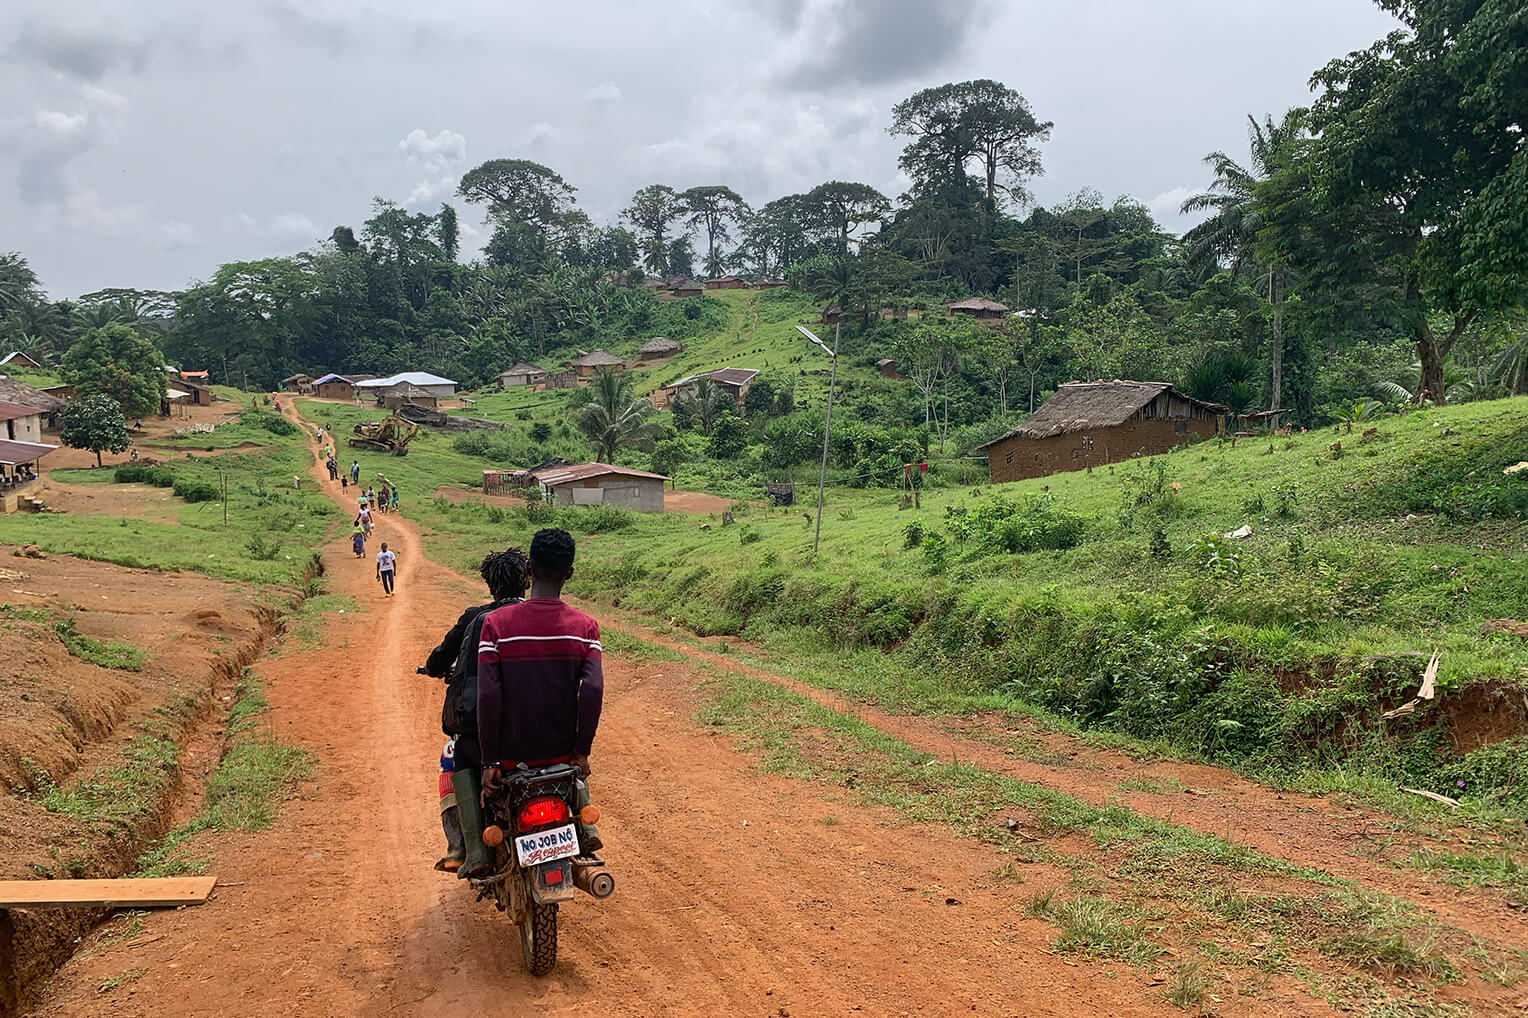 Remote areas of Liberia are learning how to rebuild community and to thrive after civil war and ebola crippled the country.